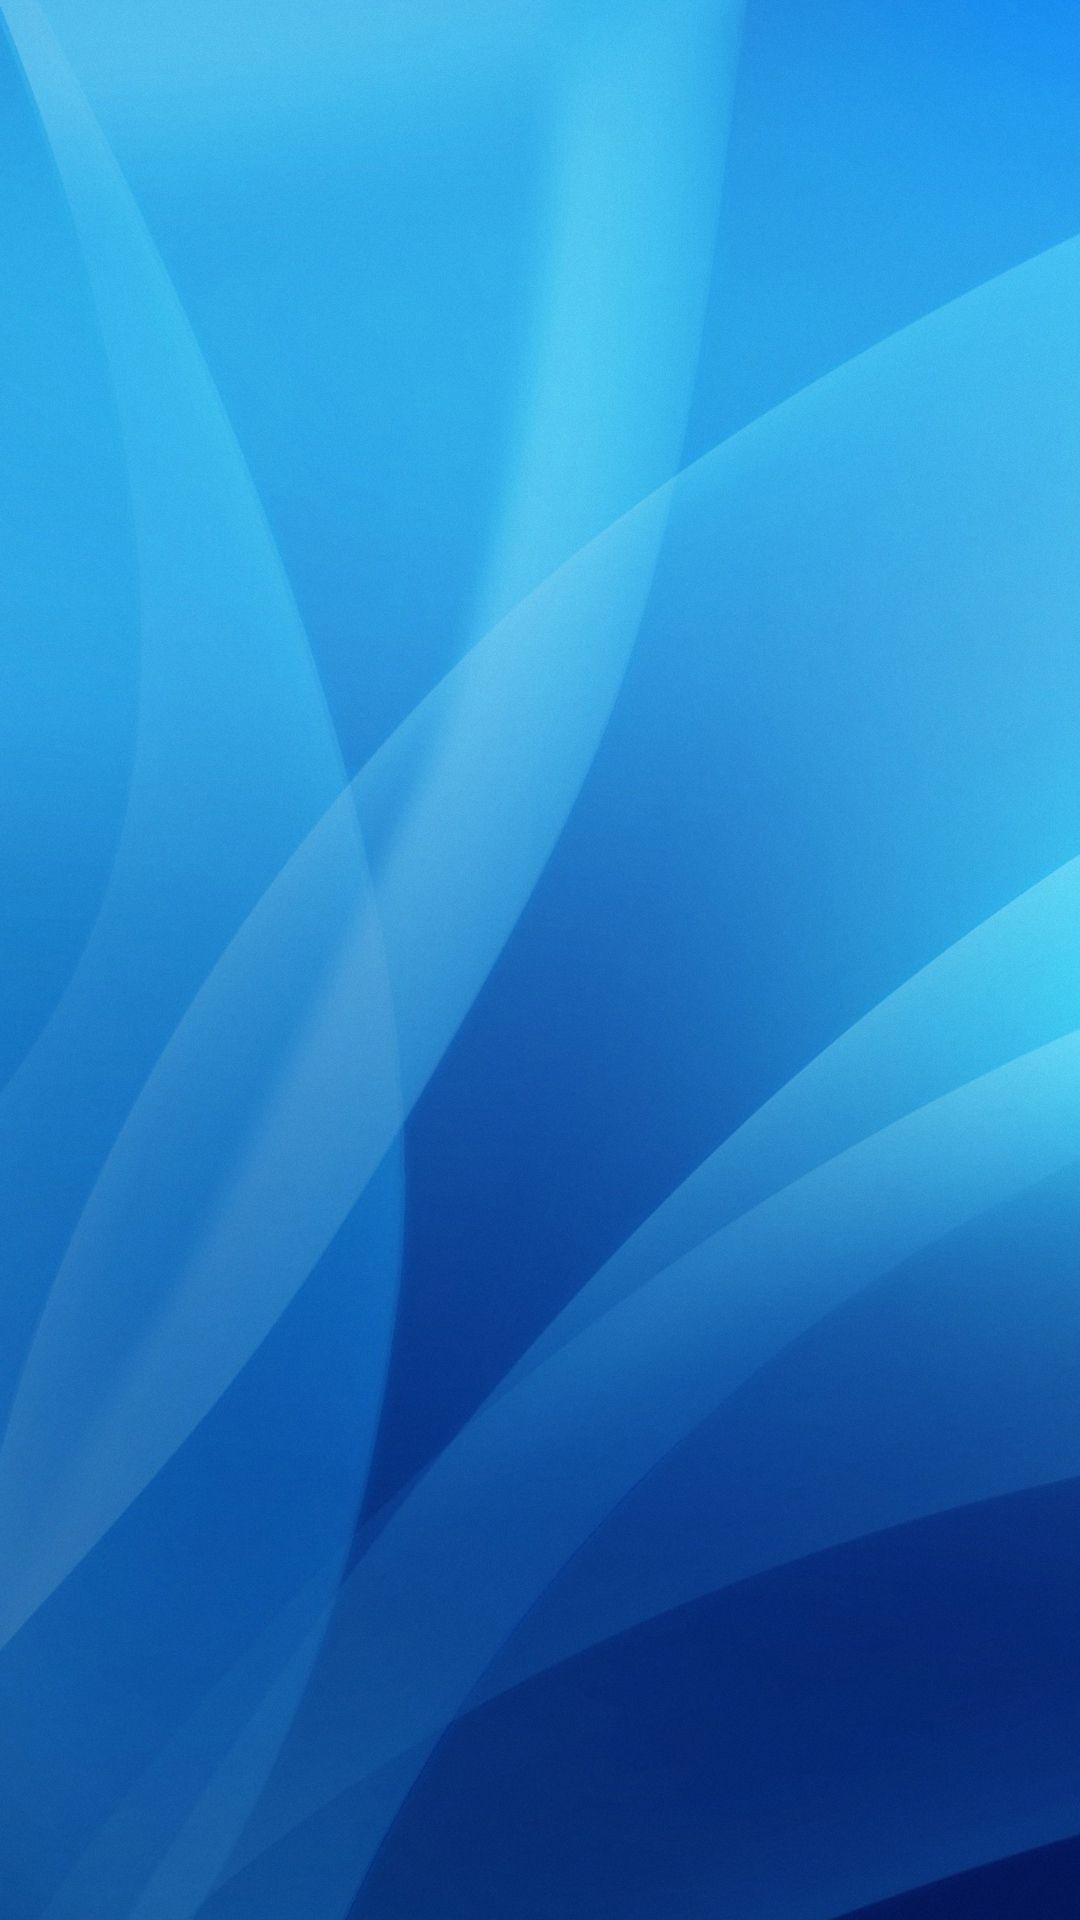 Samsung Blue Wallpapers